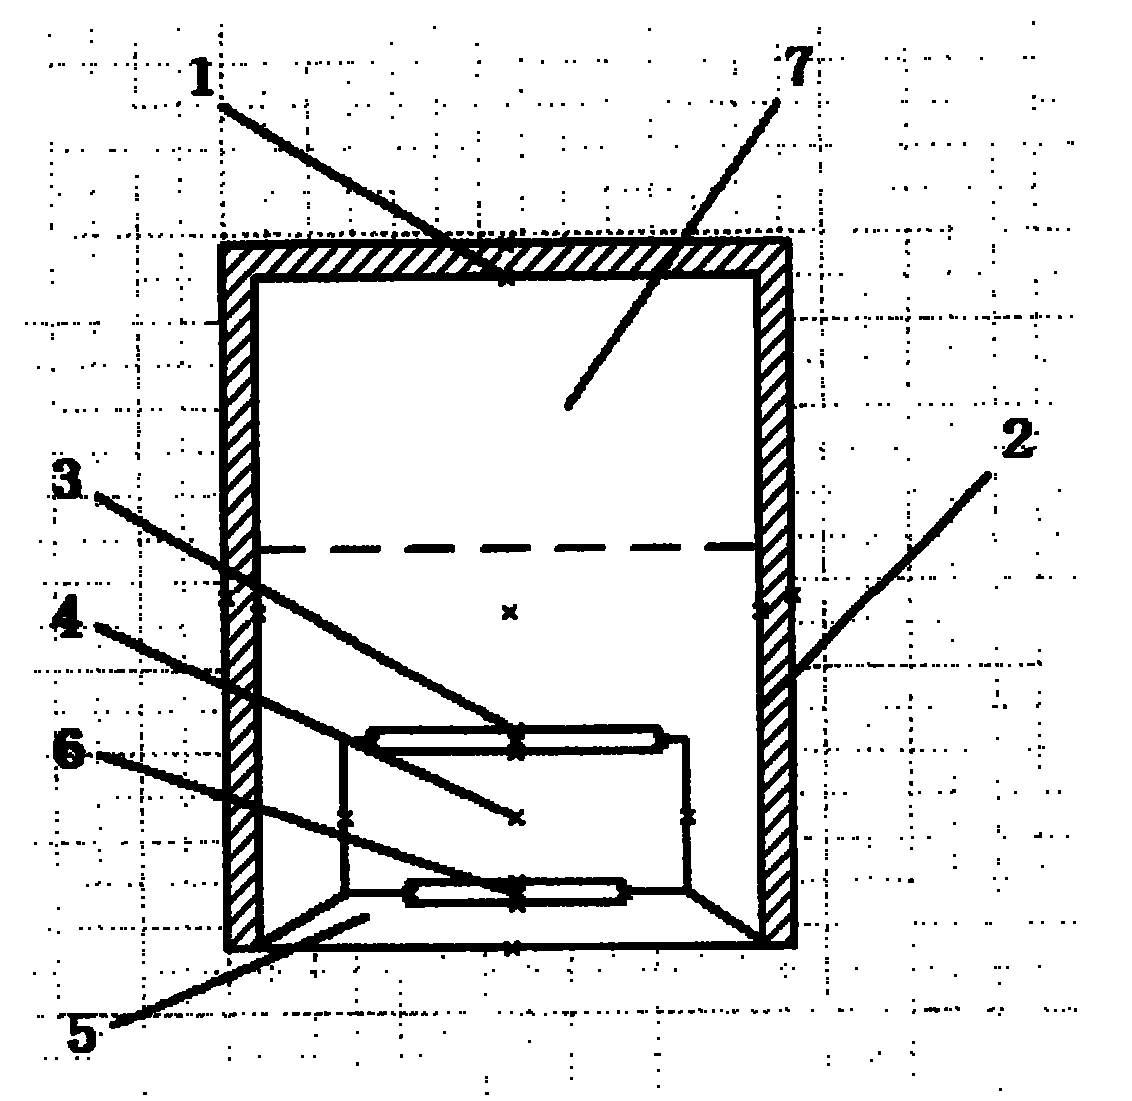 Small-sized central air-conditioner air intake and discharge system for buildings